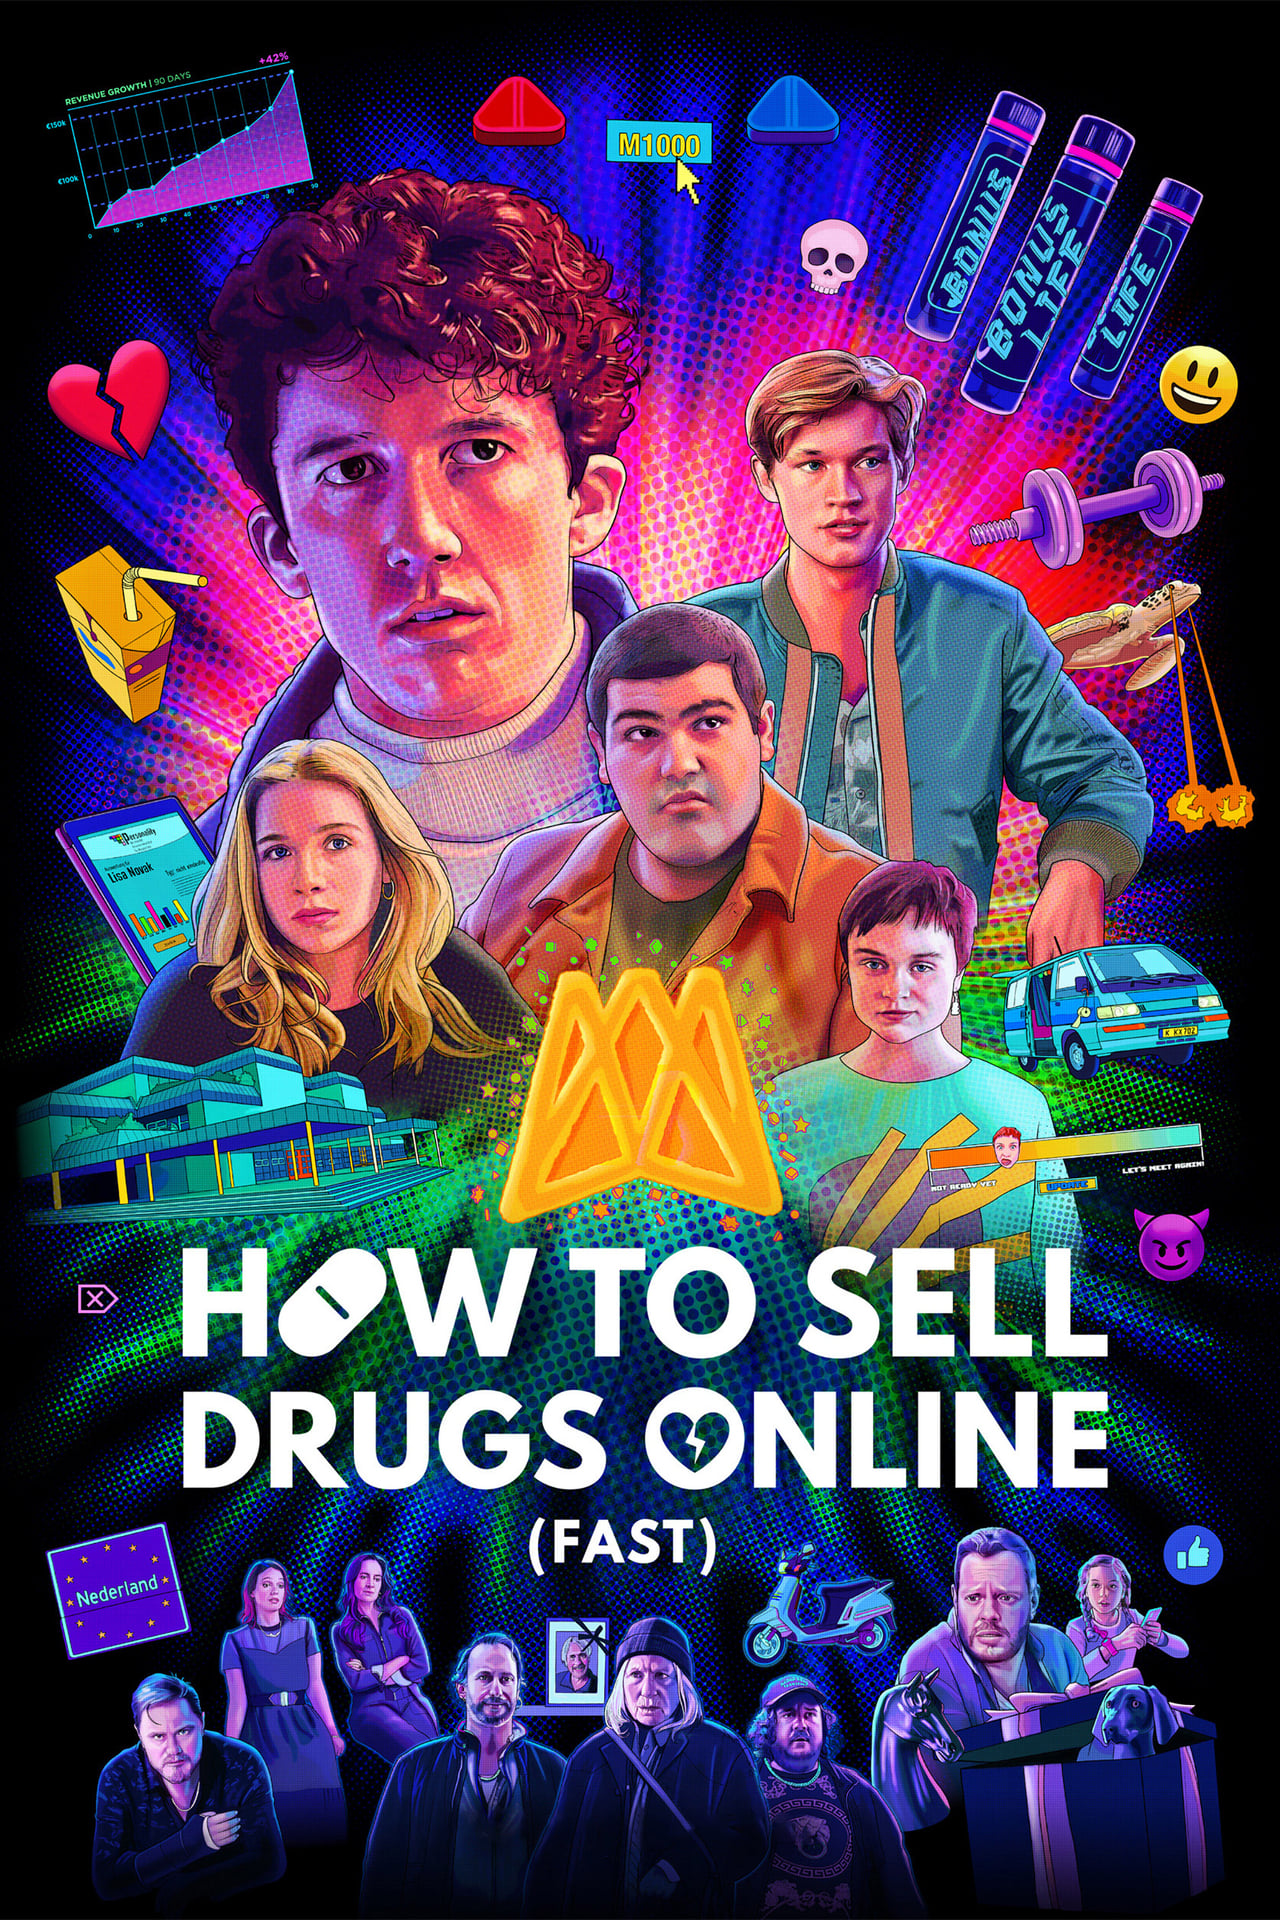 How to Sell Drugs Online (Fast) (season 3)